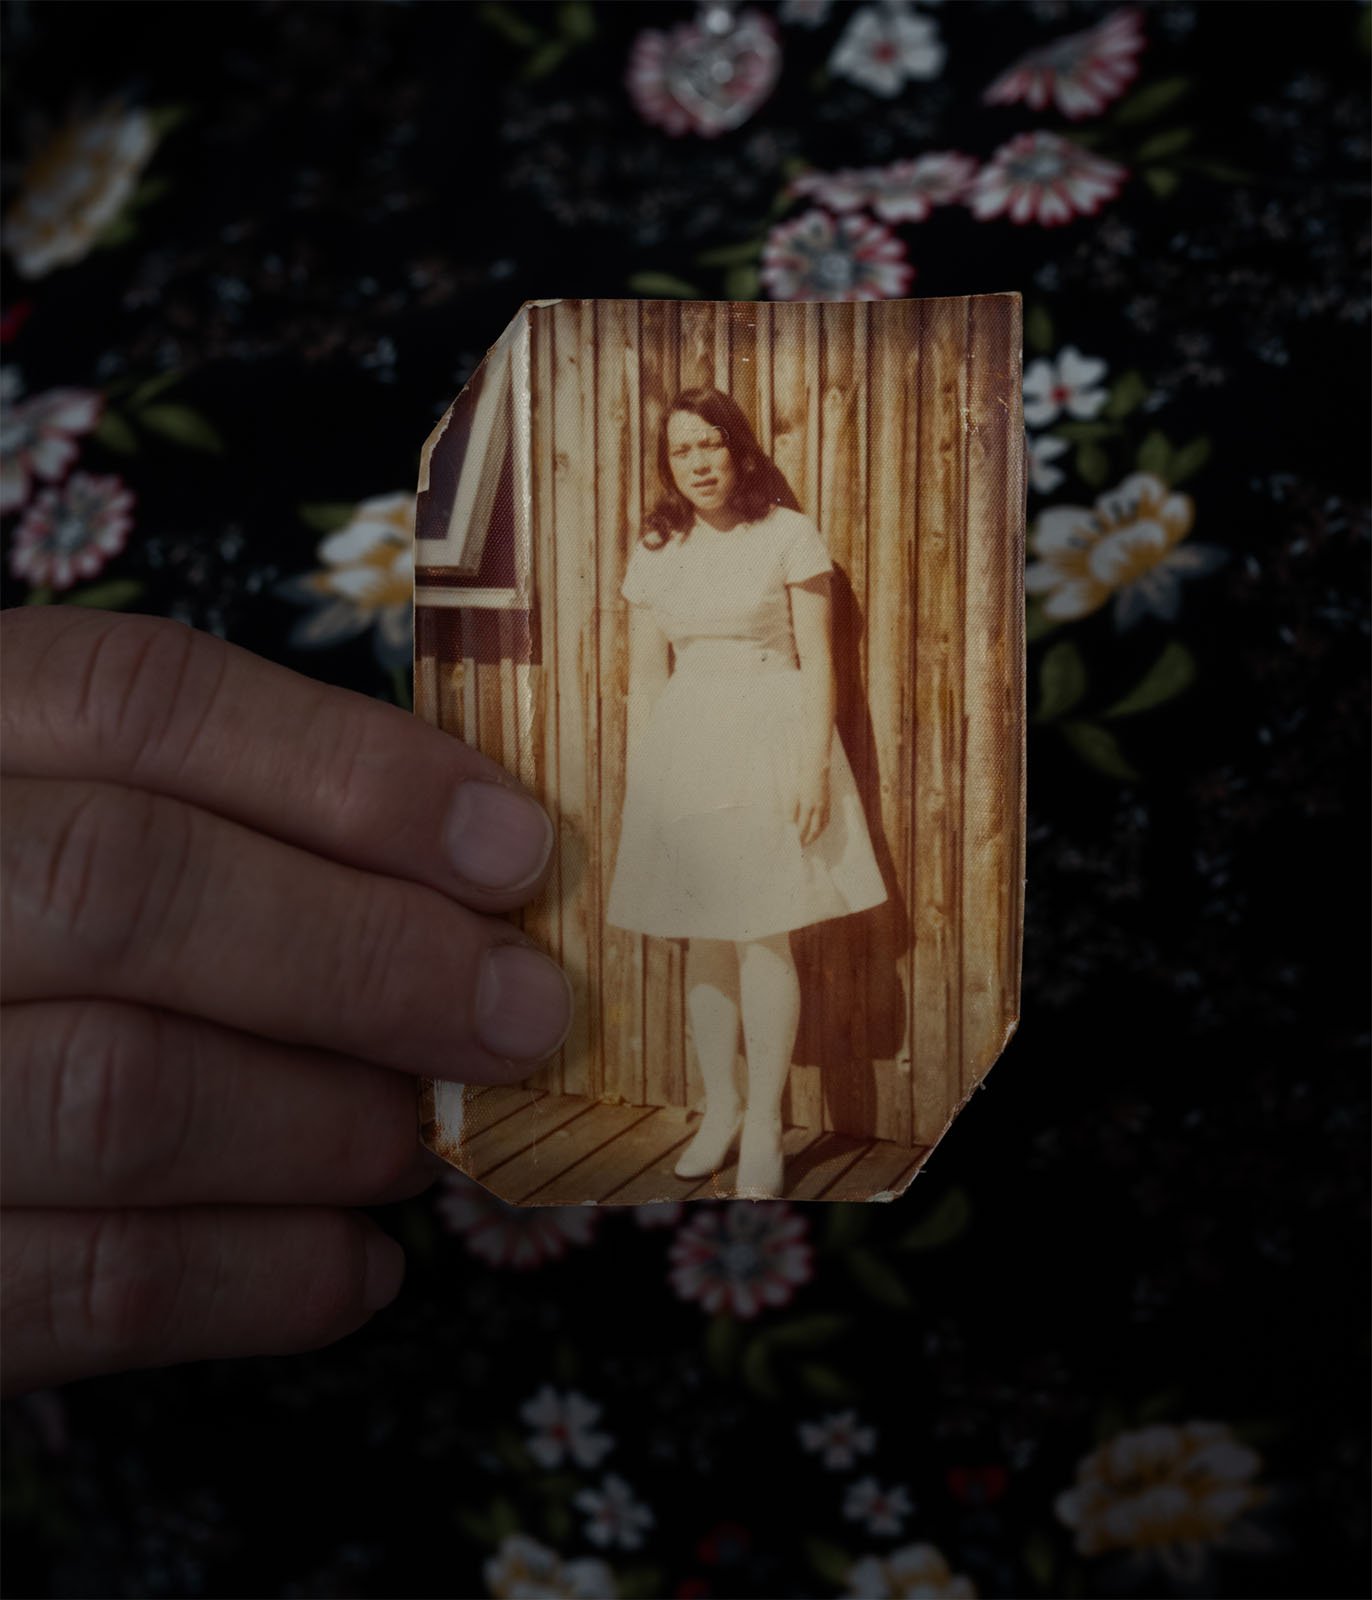 A hand holds a worn, vintage photograph of a woman standing in front of a wooden backdrop, against a dark floral patterned background.